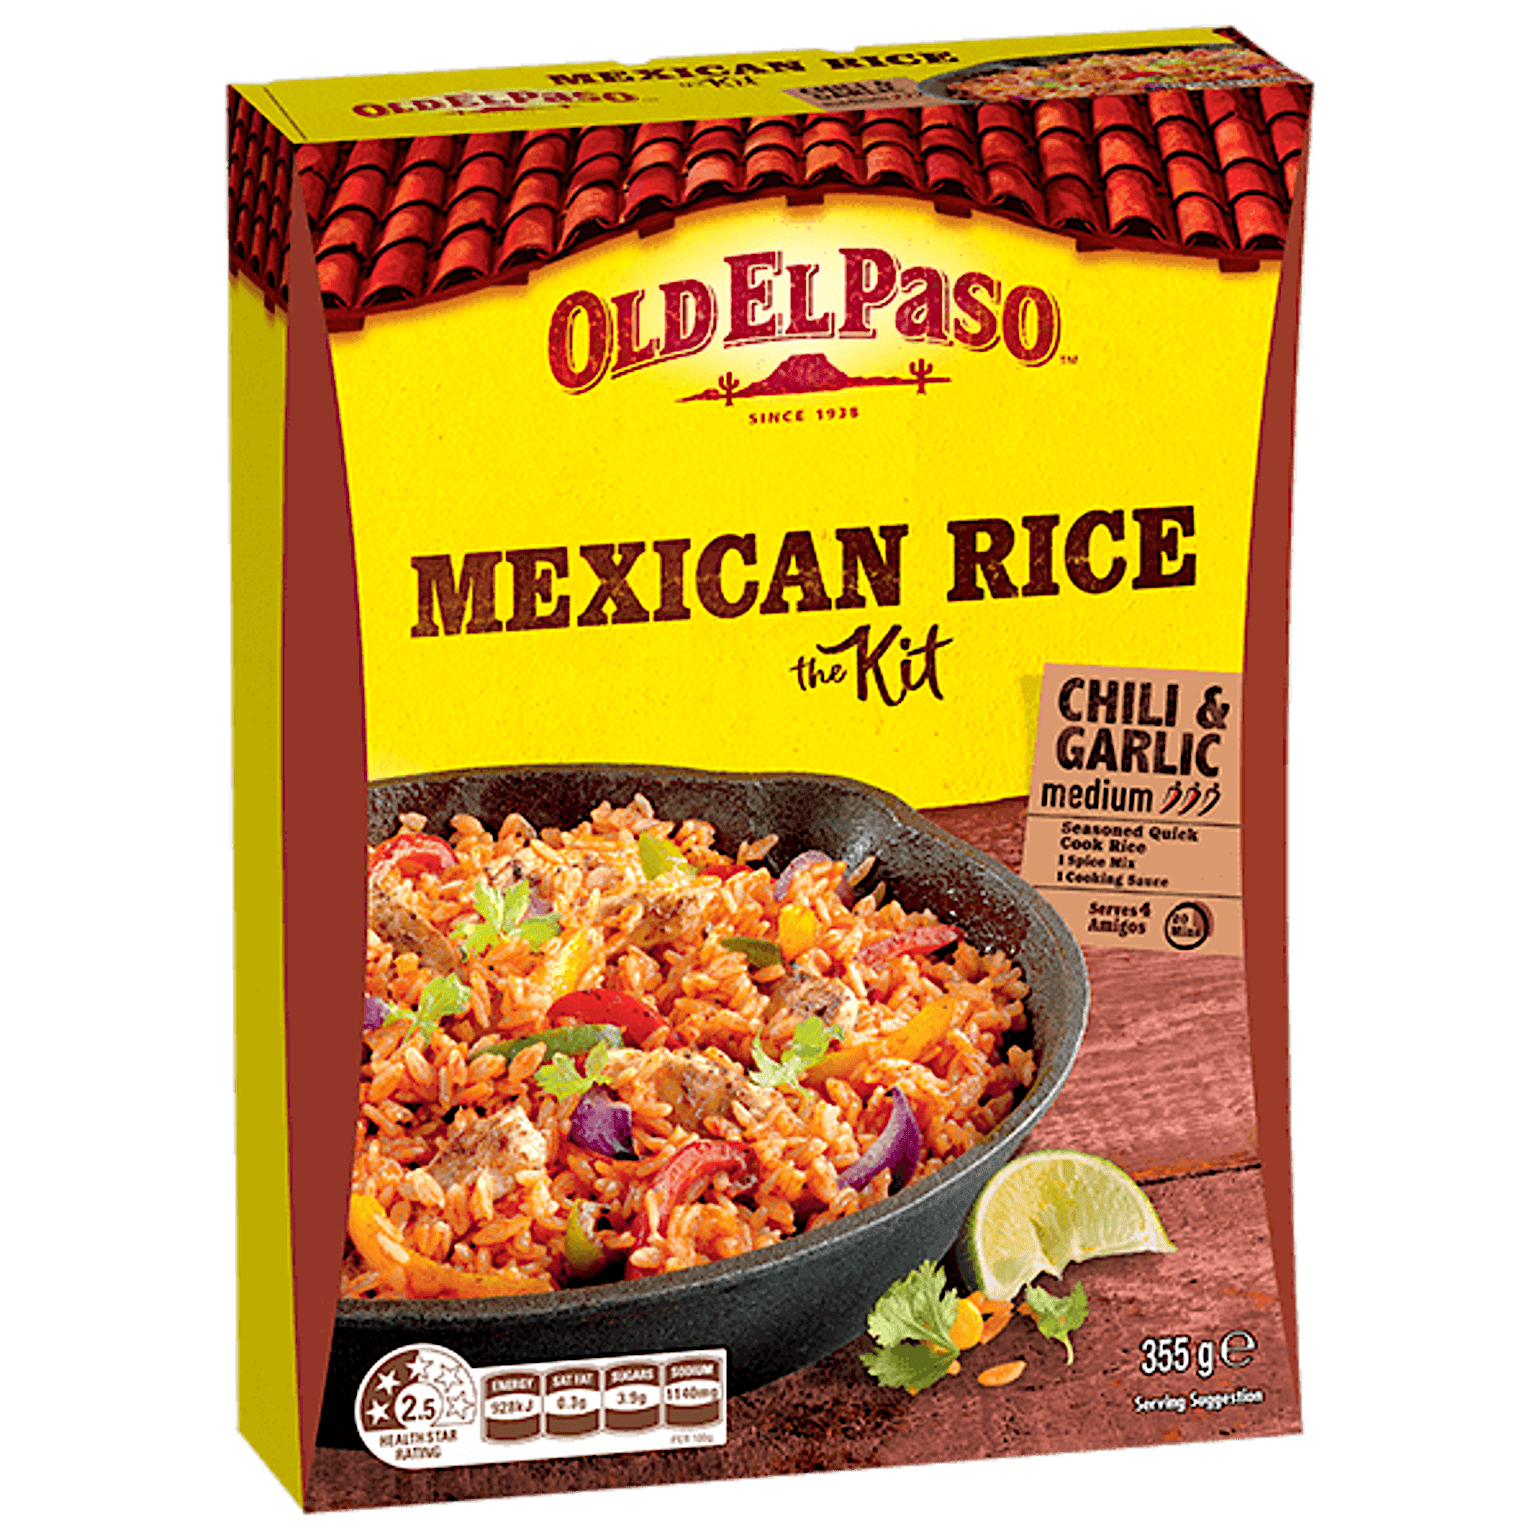 a pack of Old El Paso's chili & garlic mexican rice kit medium containing seasoned rice, spice mix & cooking sauce